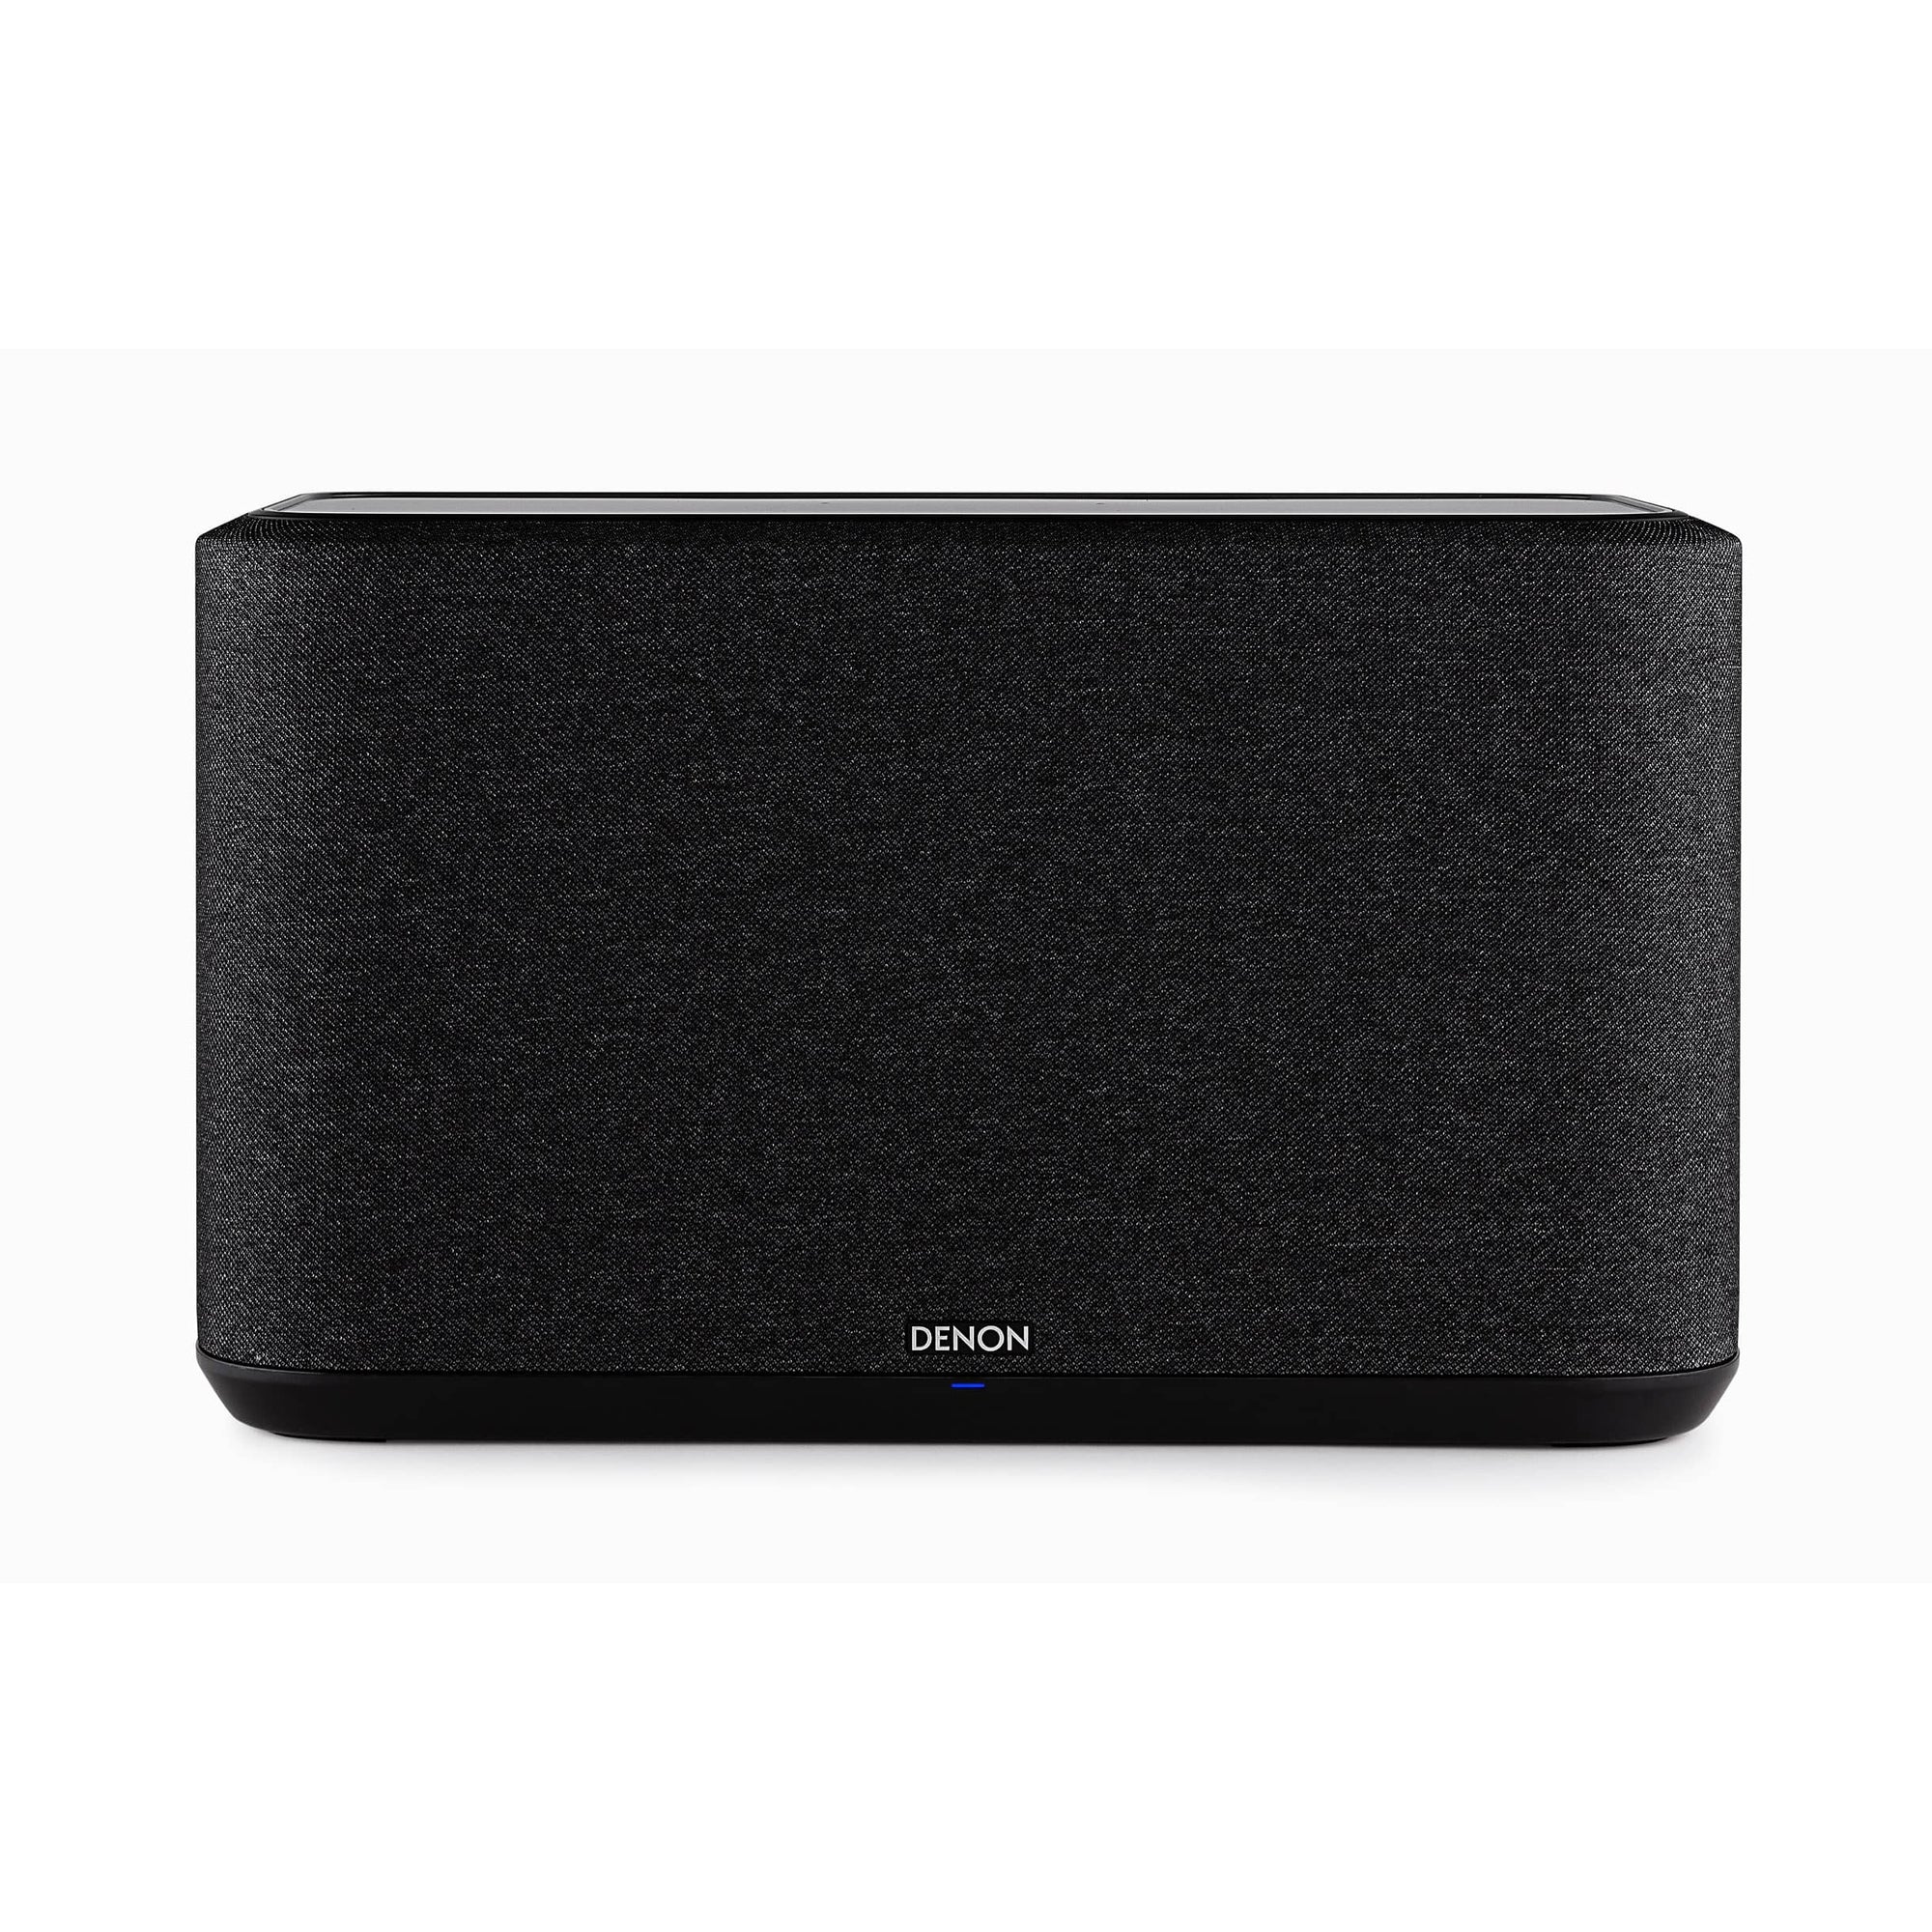 Denon Home 350 Wireless Smart Multiroom Speaker with Built-In HEOS - Black | DENONHOME350BKE2GB from Denon - DID Electrical